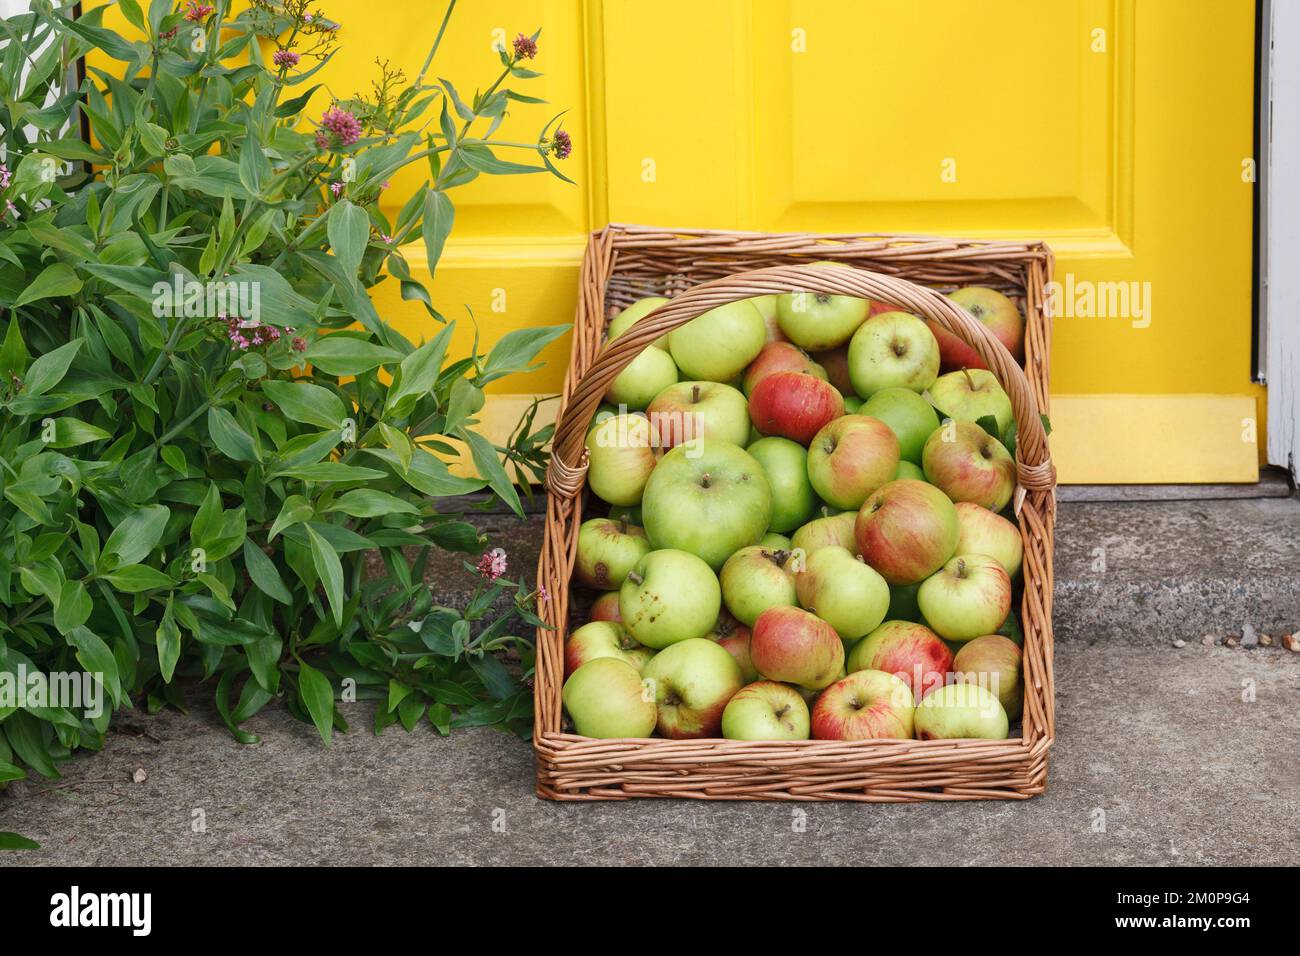 Malus domestica. Apples on the front doorstep. Stock Photo